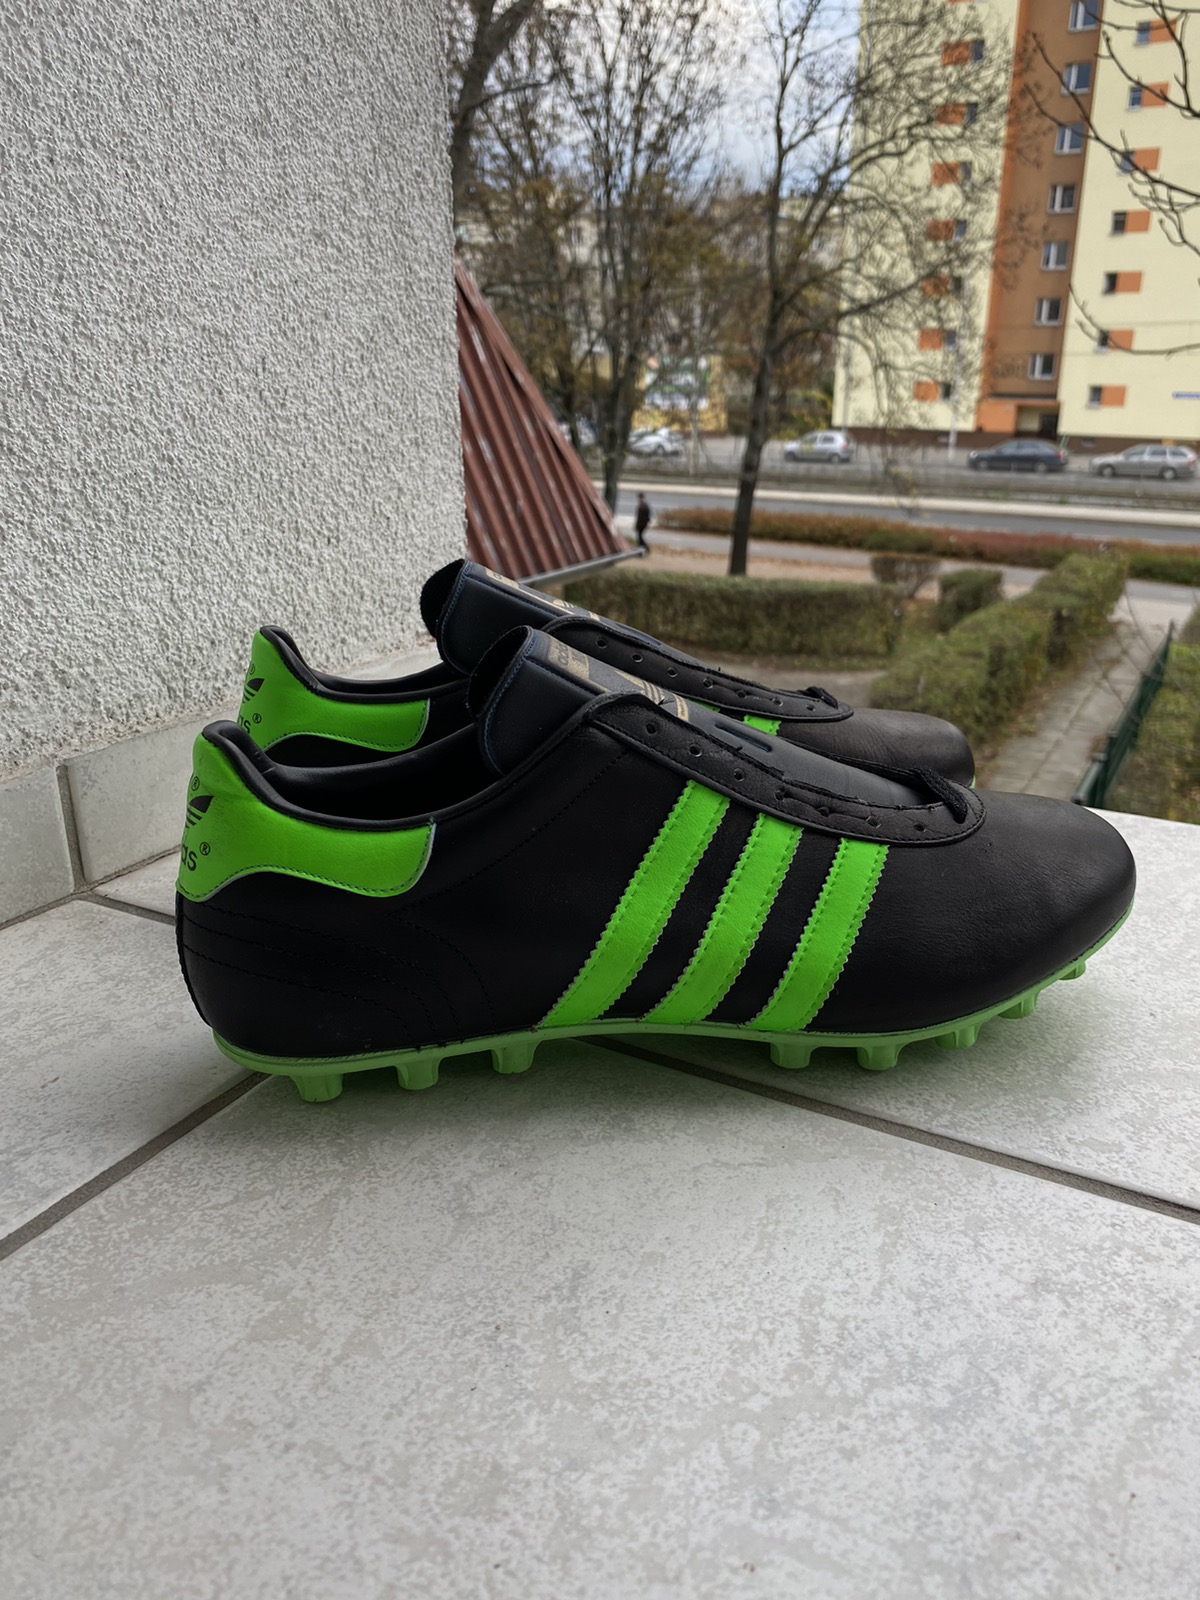 Adidas Milano made in France football boots 70-80s - 1